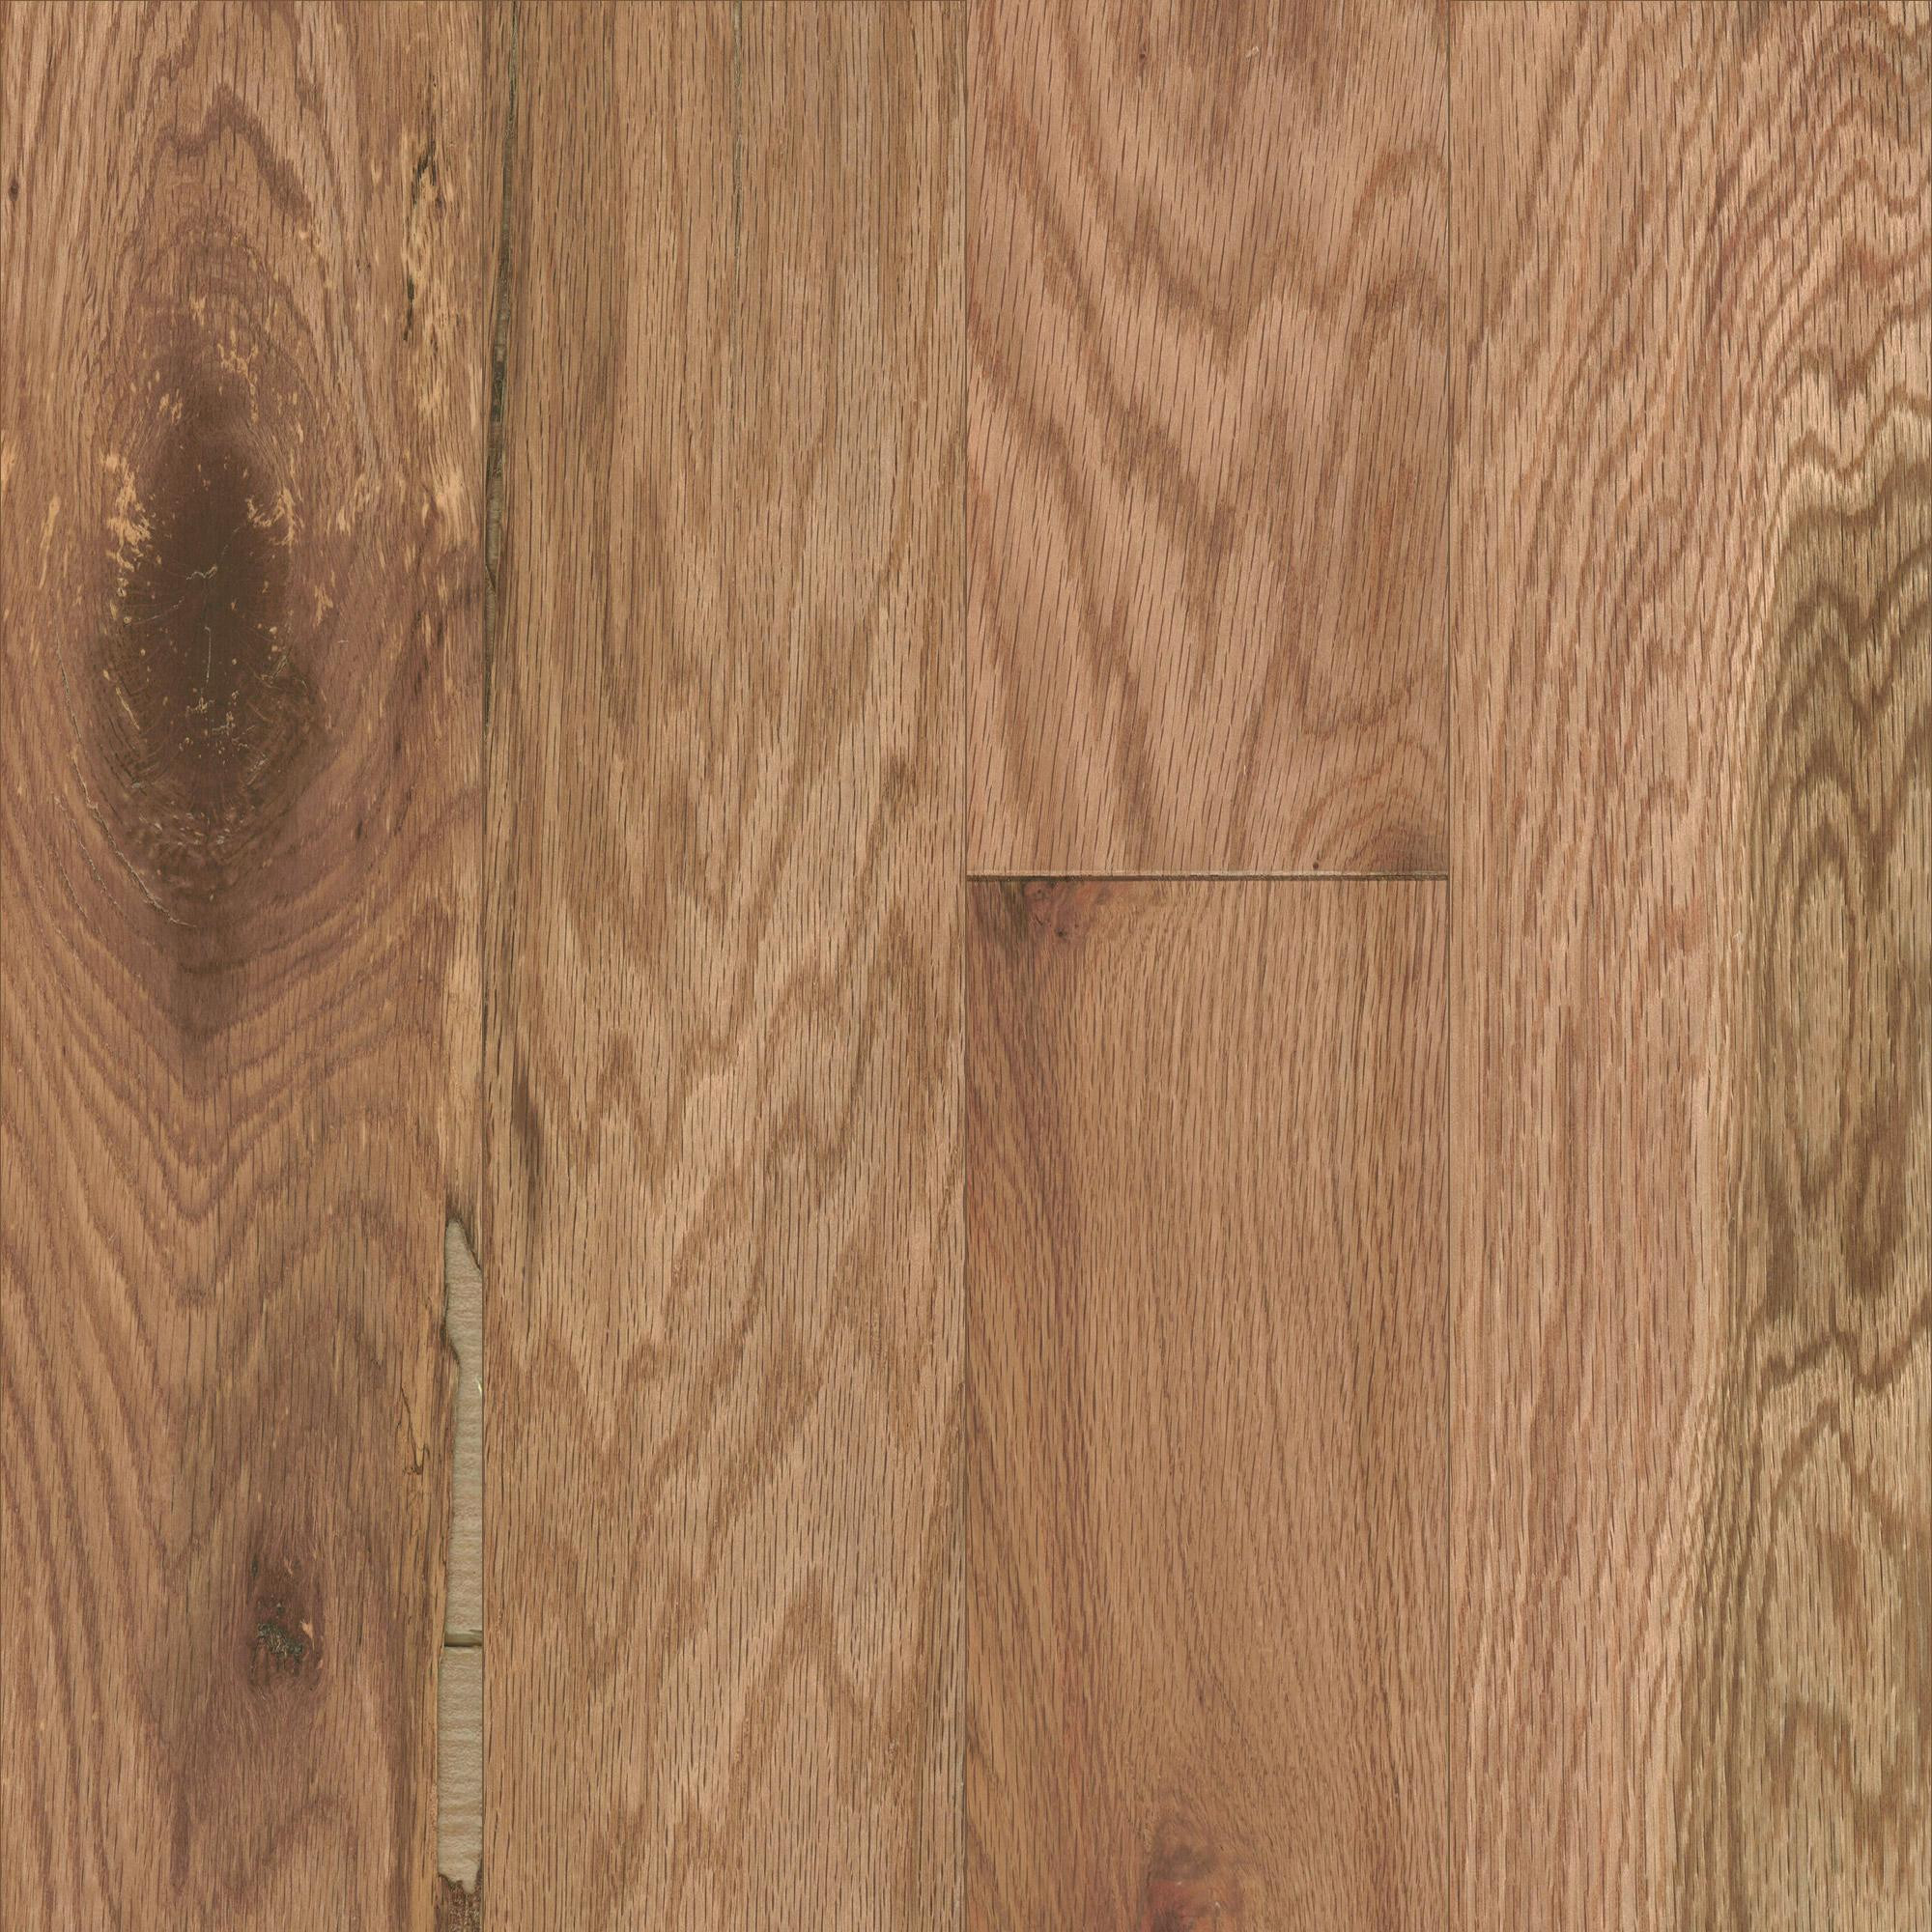 28 Popular Replacing Engineered Hardwood Floor Planks 2024 free download replacing engineered hardwood floor planks of mullican ridgecrest red oak natural 1 2 thick 5 wide engineered intended for mullican ridgecrest red oak natural 1 2 thick 5 wide engineered har